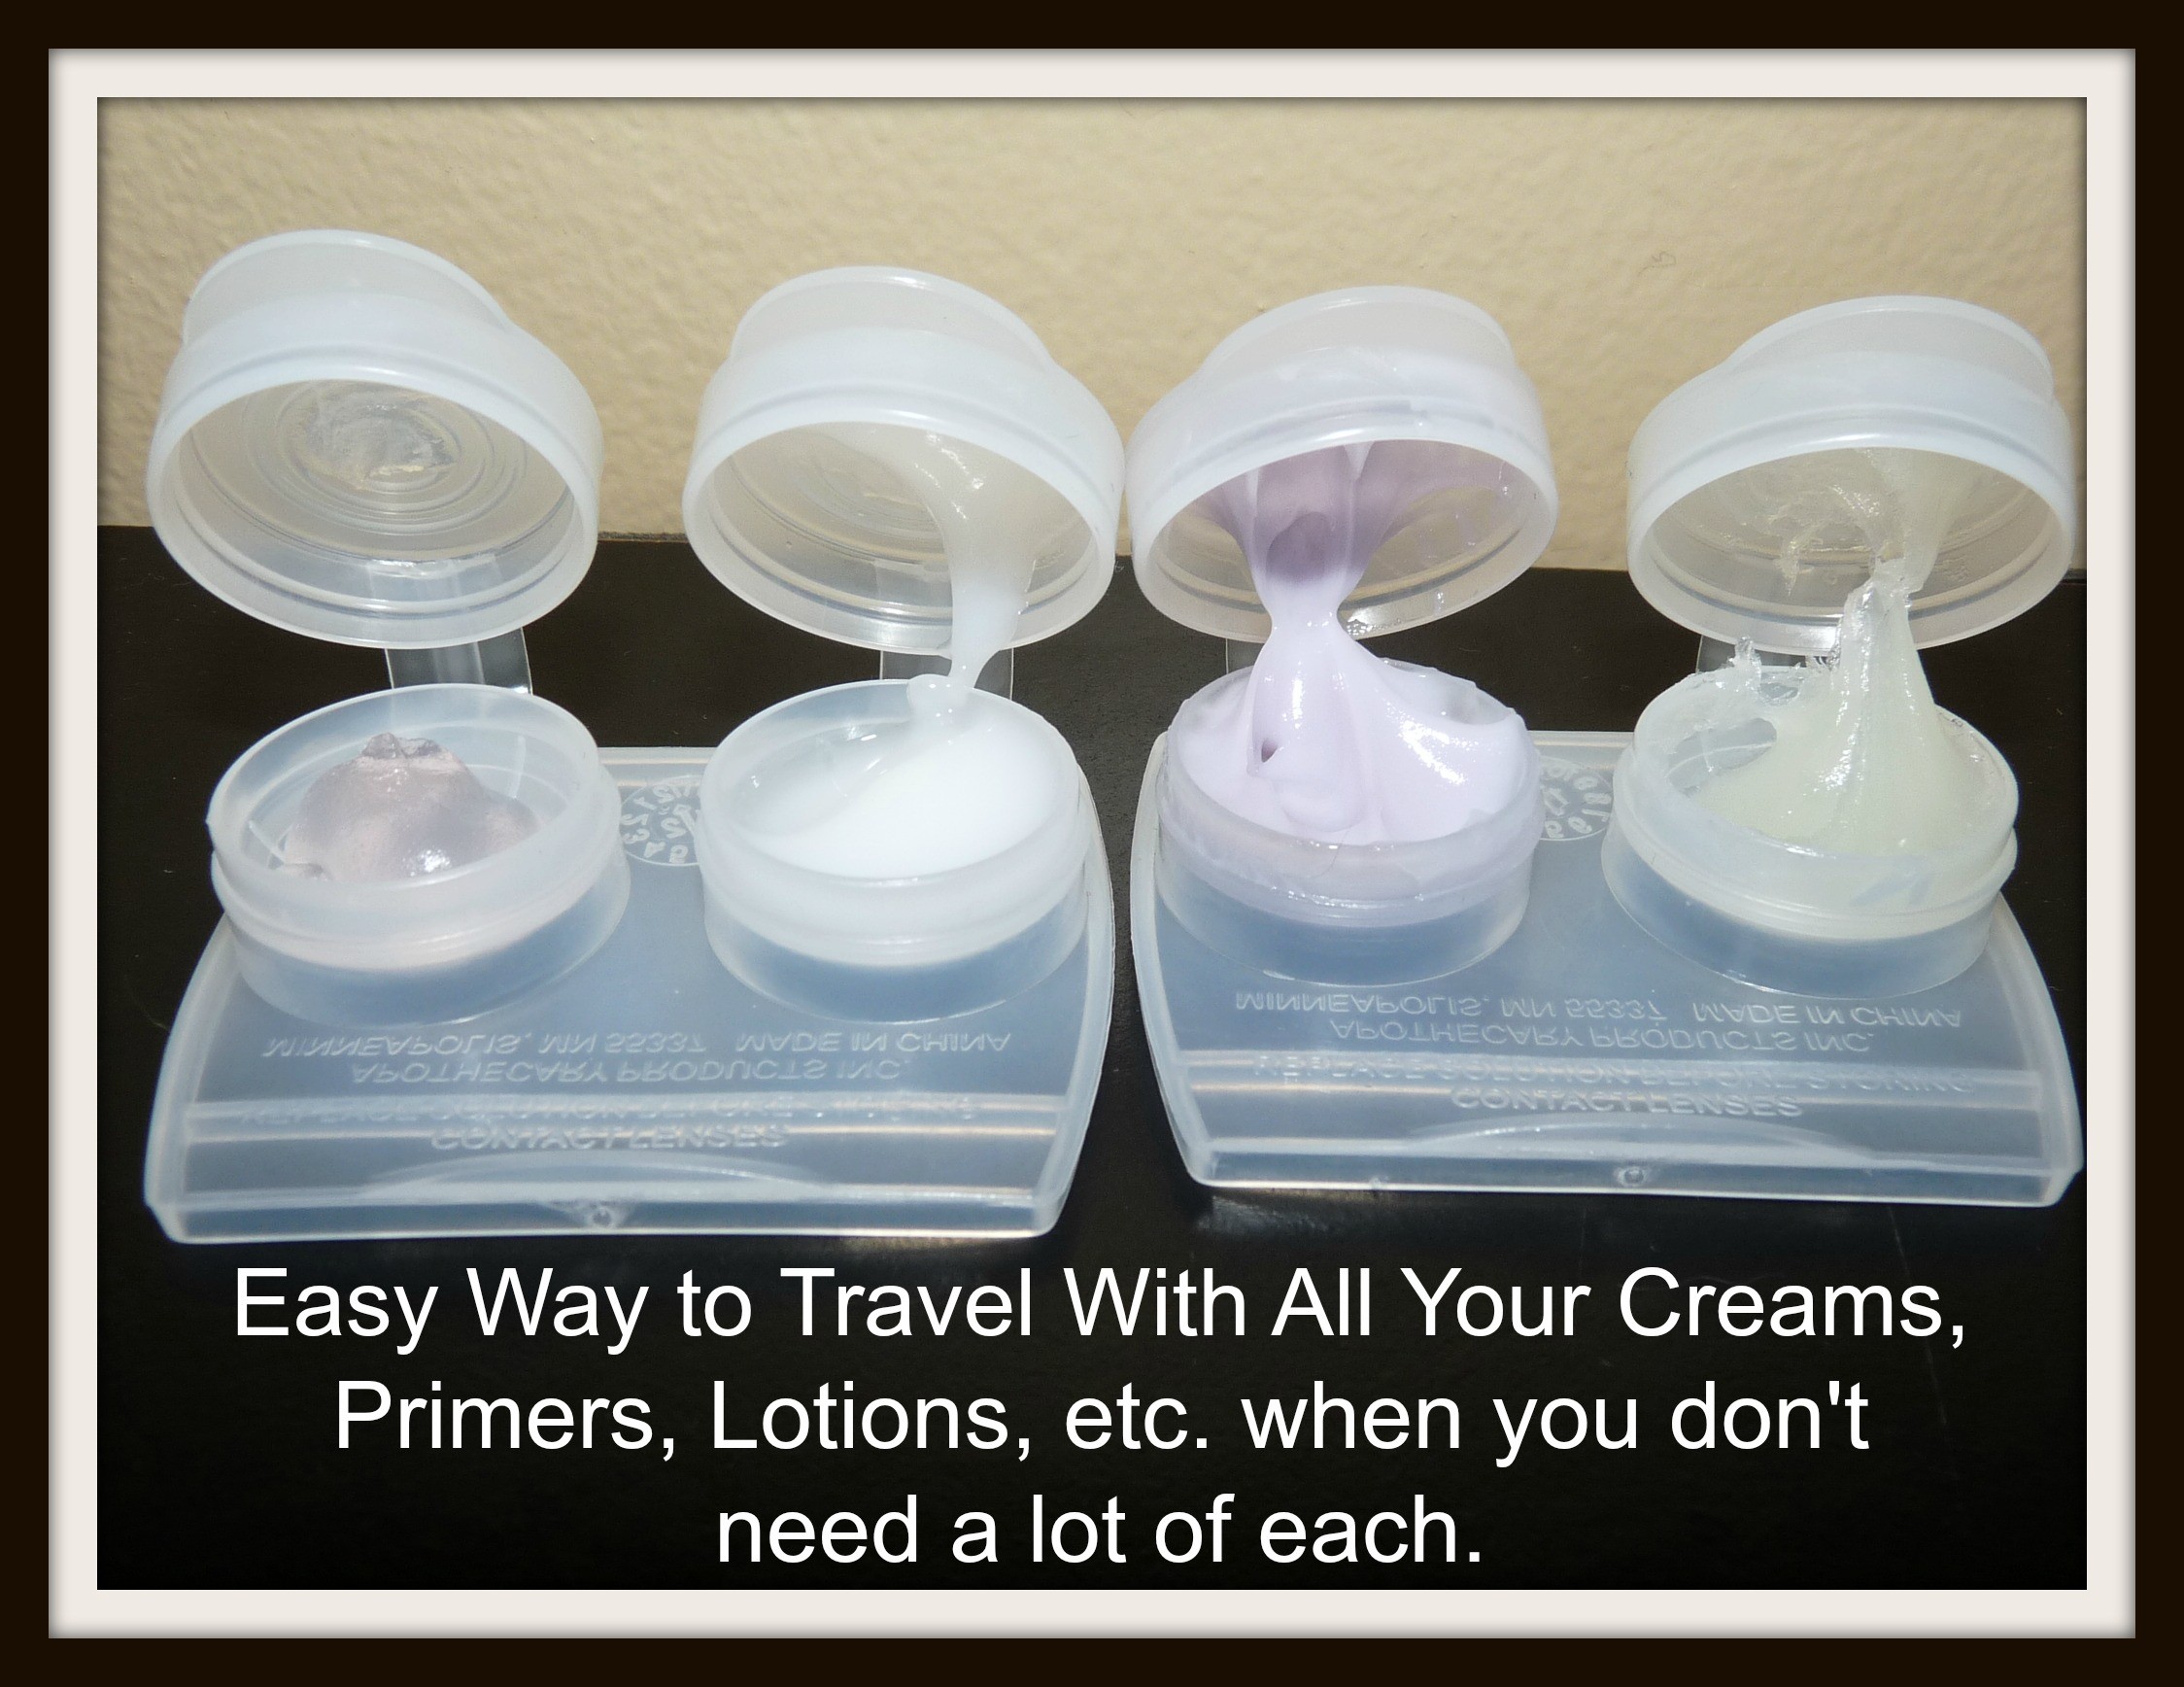 contact lens cases 10